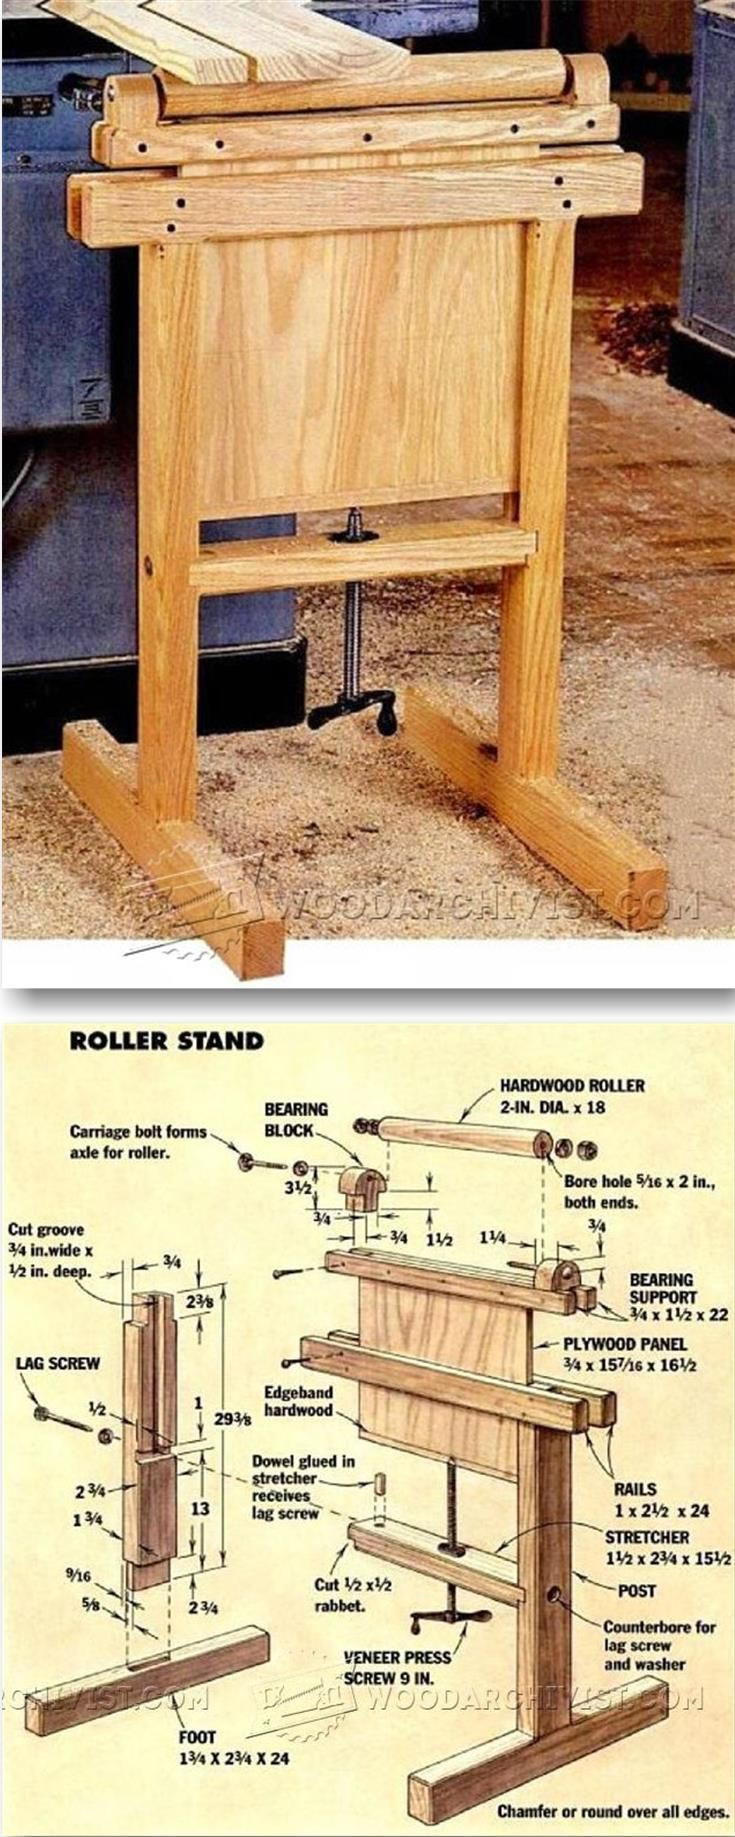 16 Great Hardwood Floor Hammer 2024 free download hardwood floor hammer of 2785 best ddc2b5nc280dc2b5dc2b2dc2be images on pinterest hangers woodworking and coat in roller stand plans workshop solutions plans tips and tricks woodarchivist co